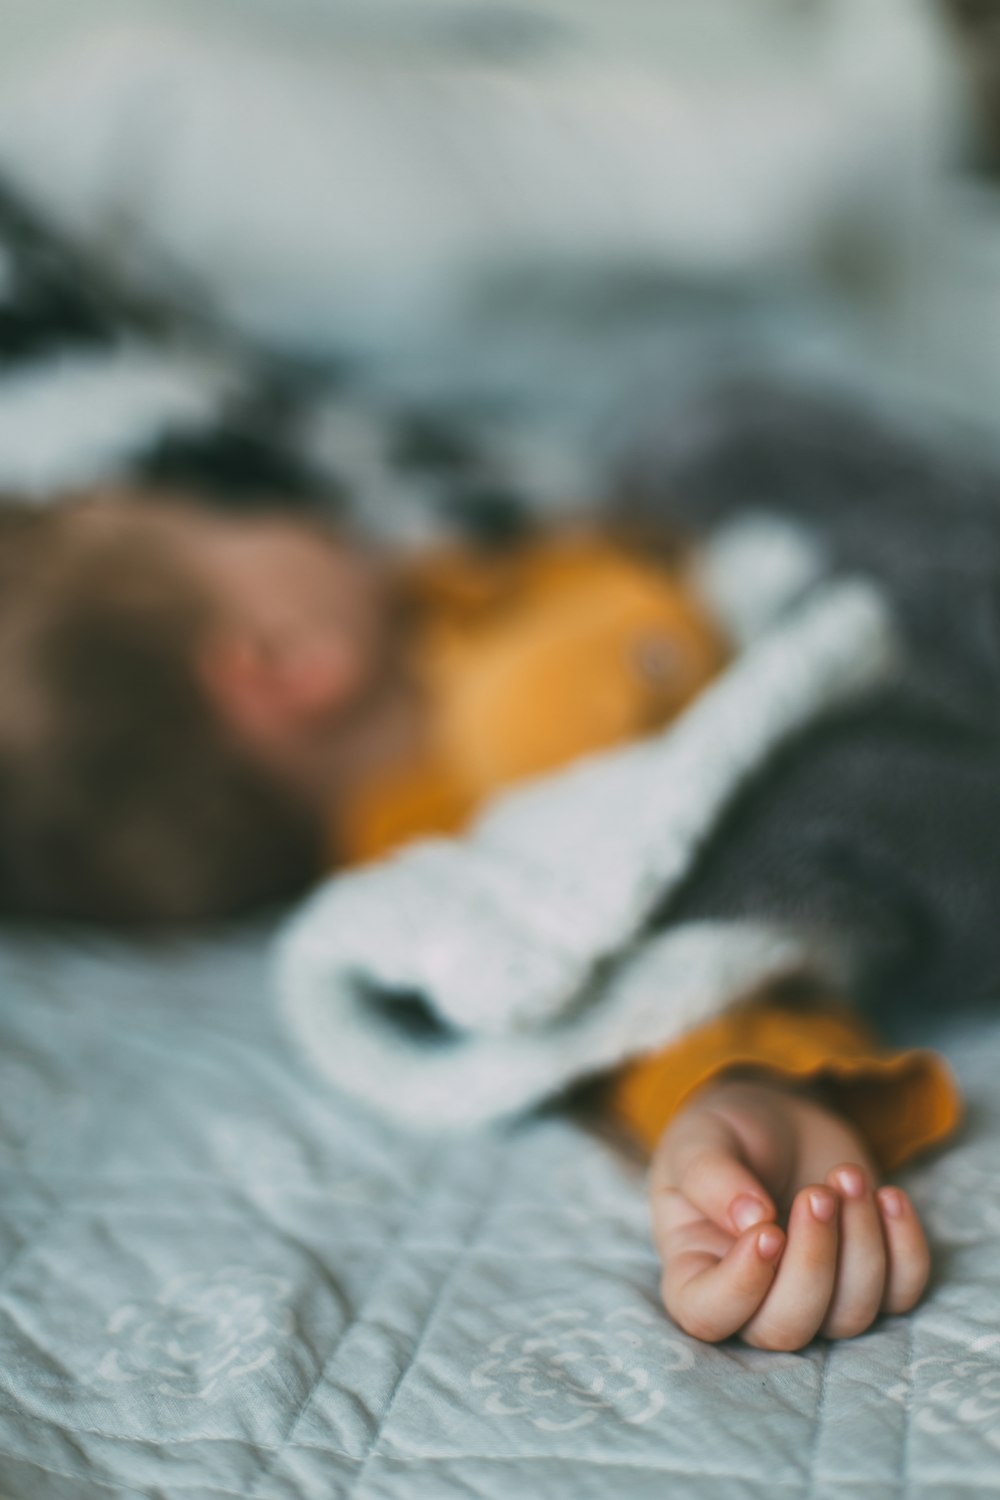 Sleeping Tips For Toddlers - Important Facts You Should Know